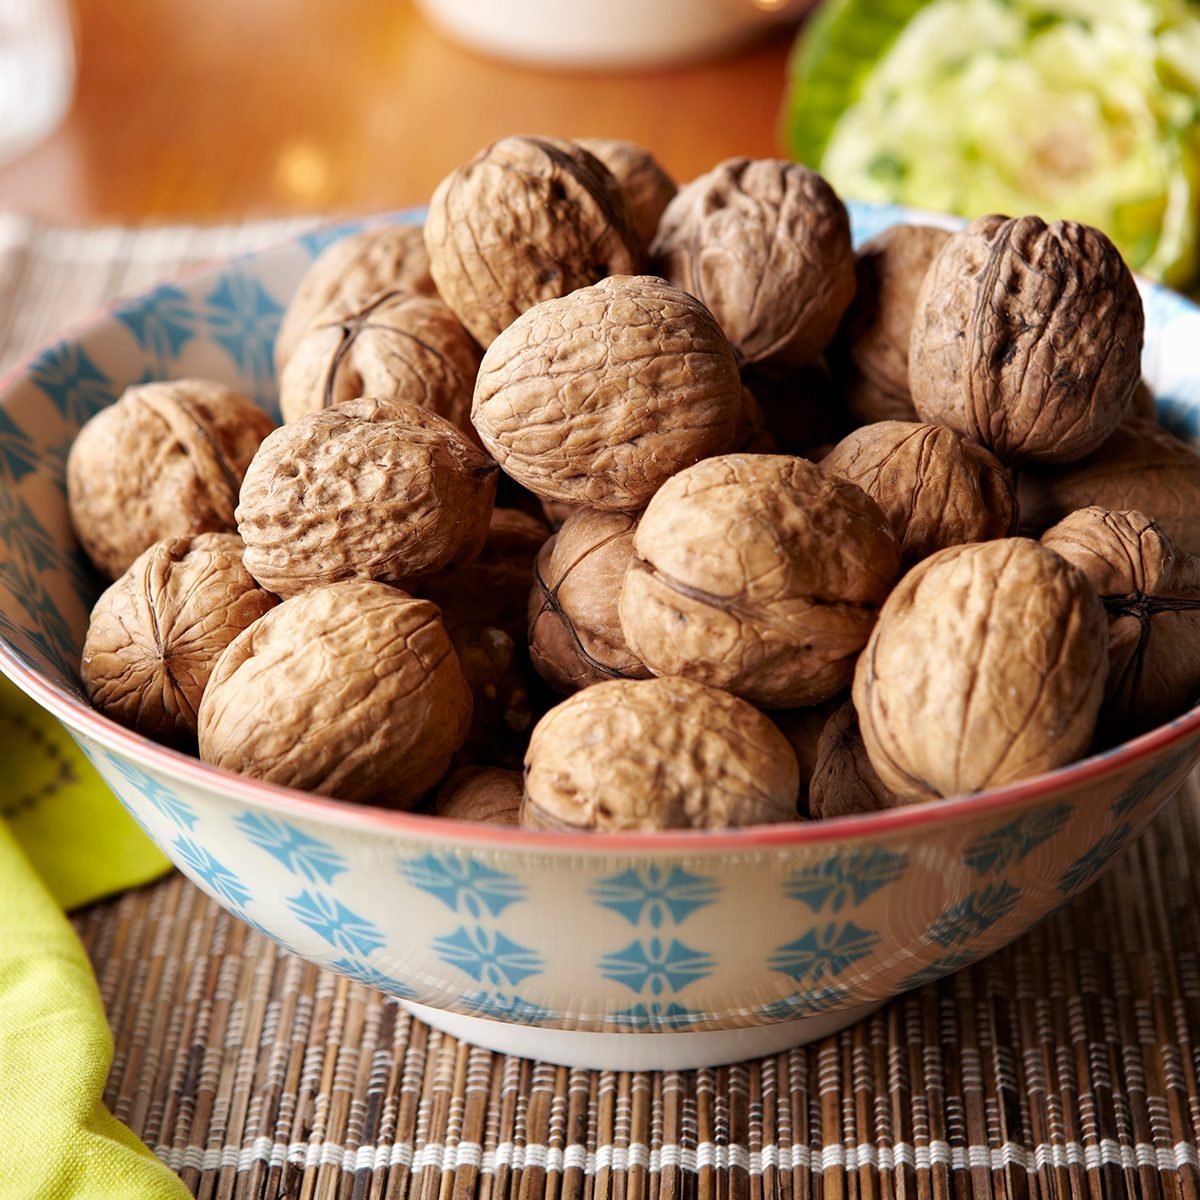 Bowl of walnuts on table